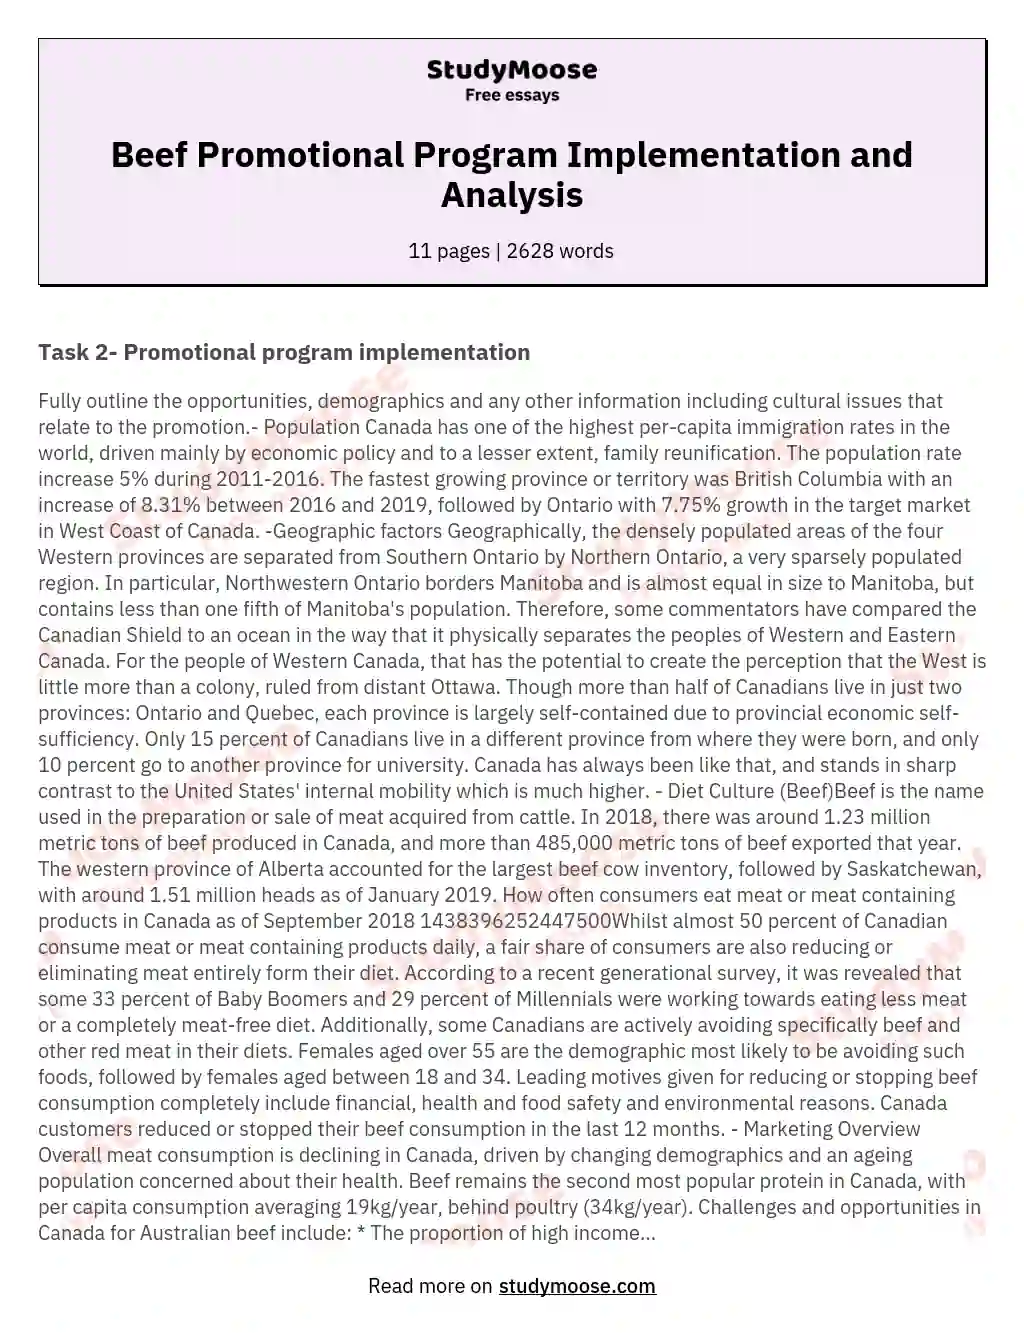 Beef Promotional Program Implementation and Analysis essay